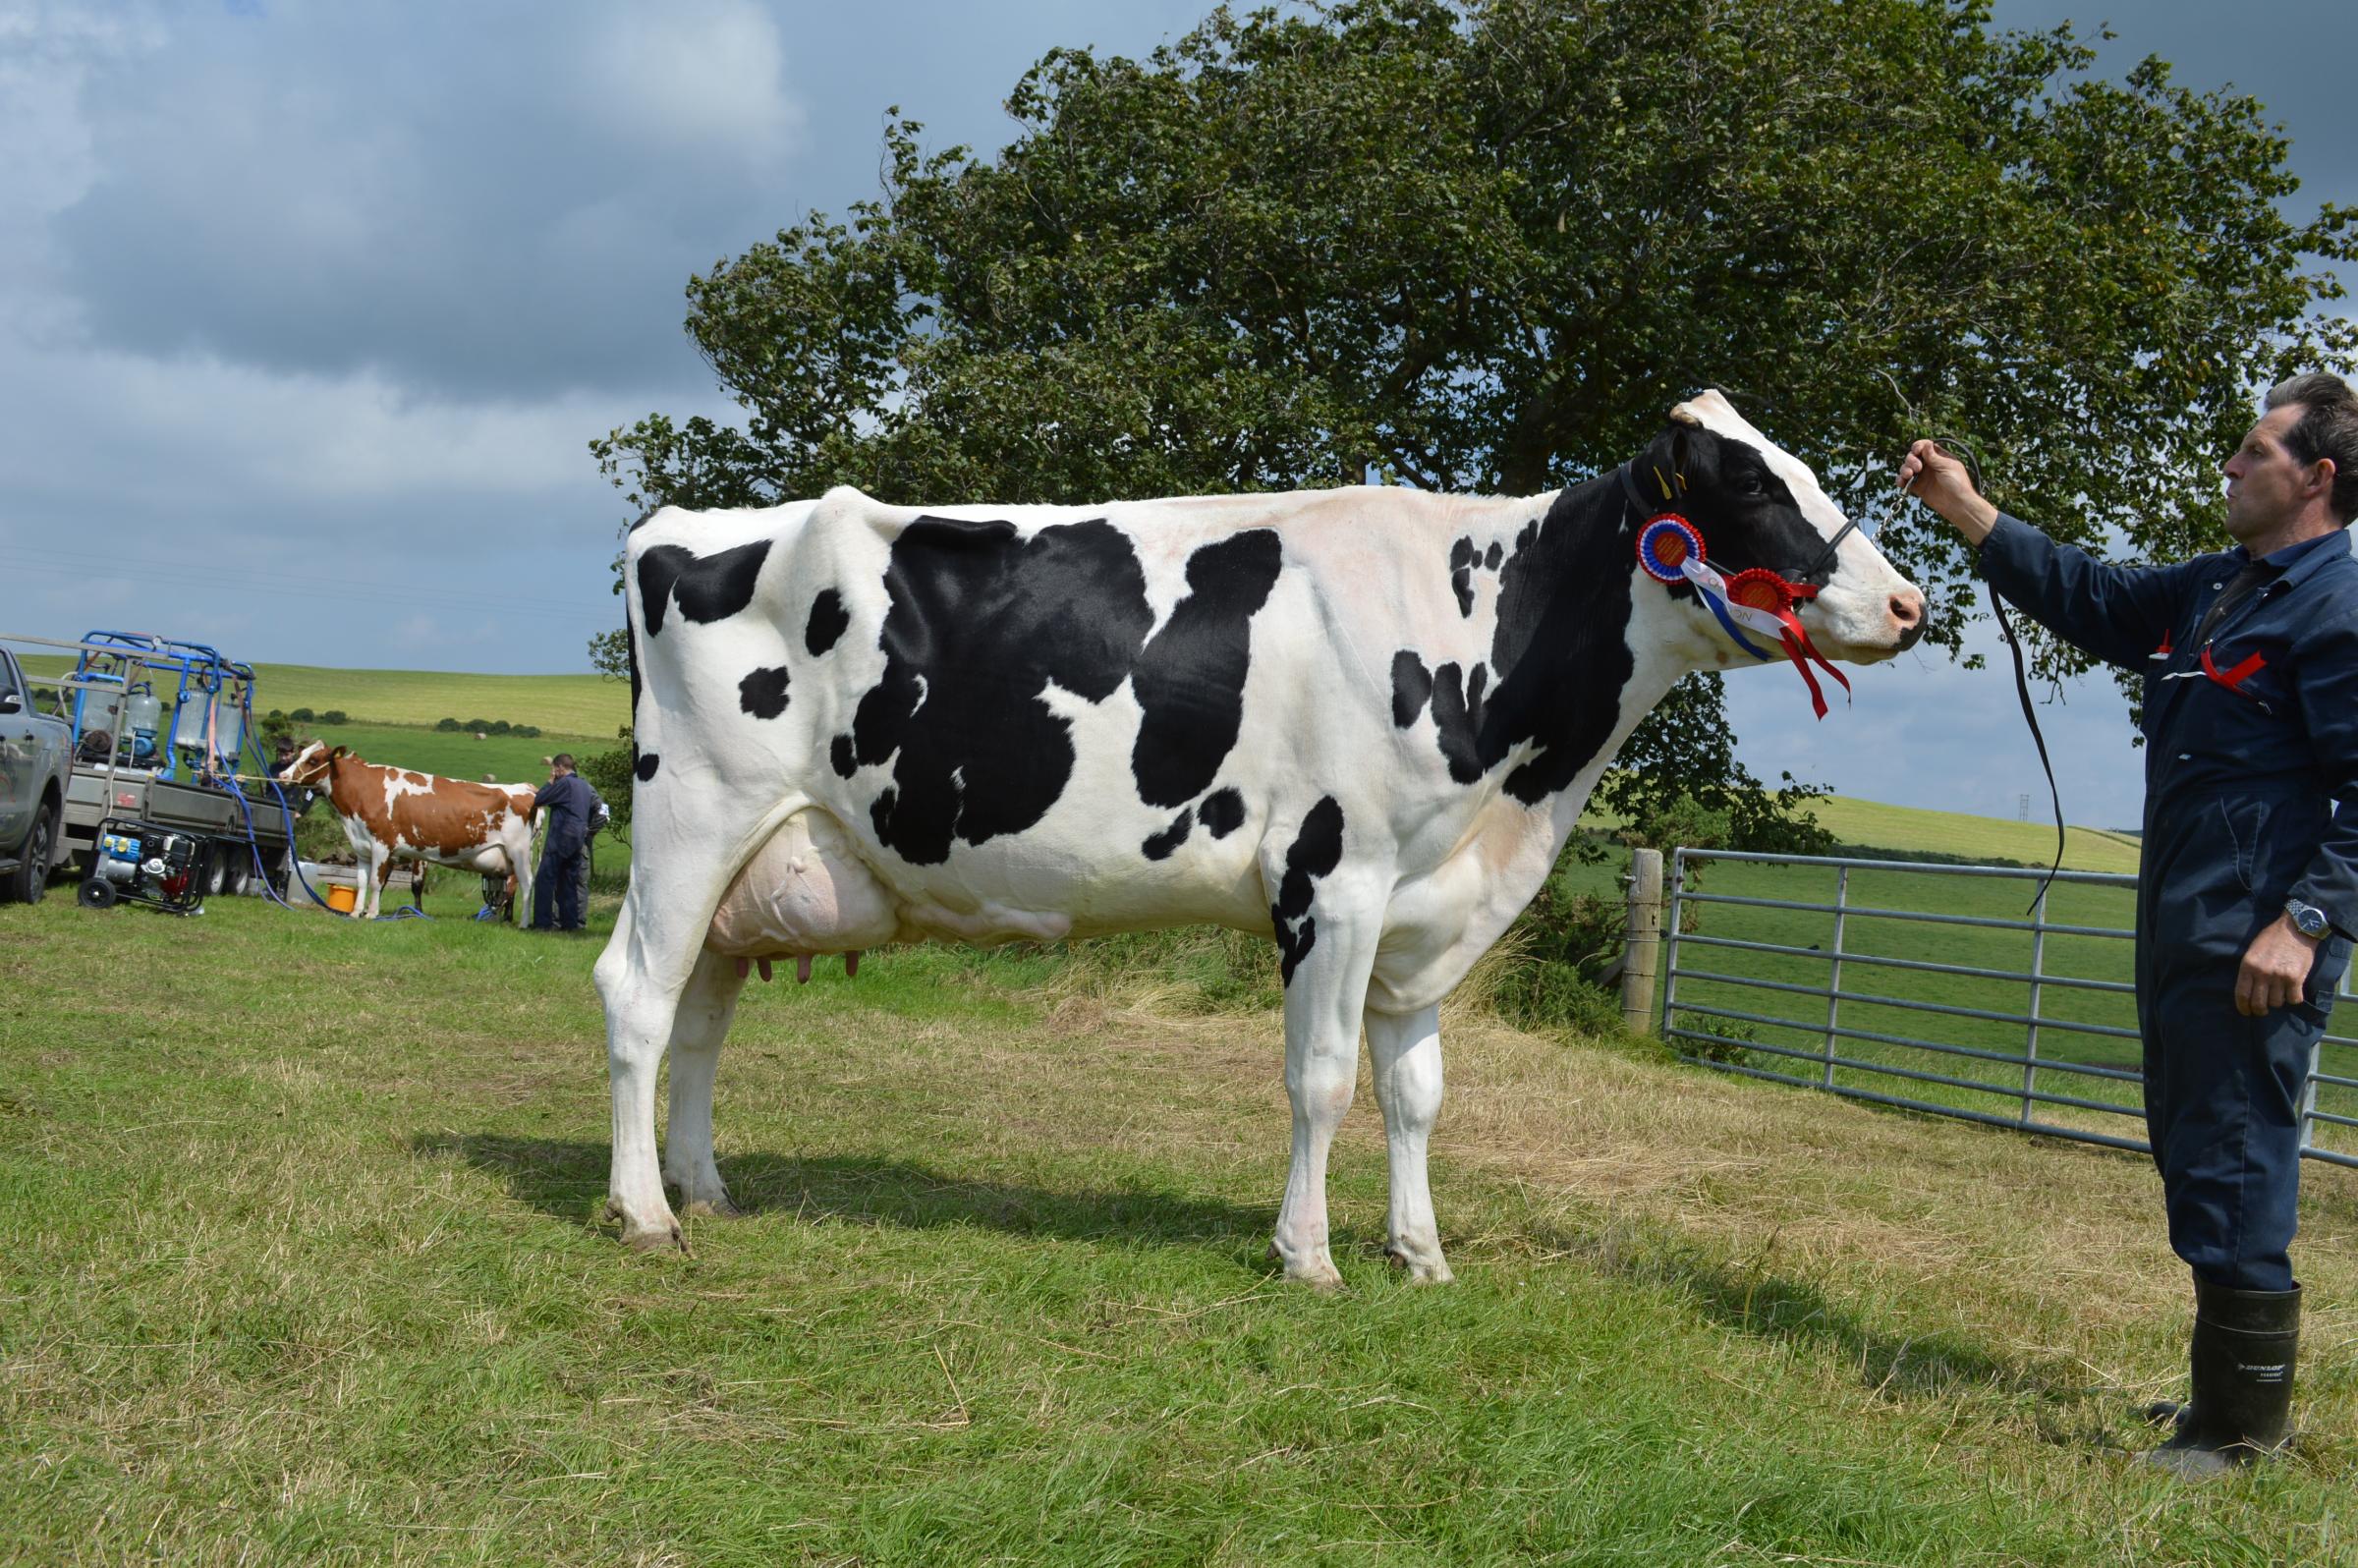 The Holstein champion came from G Semple, Kilkeddan,